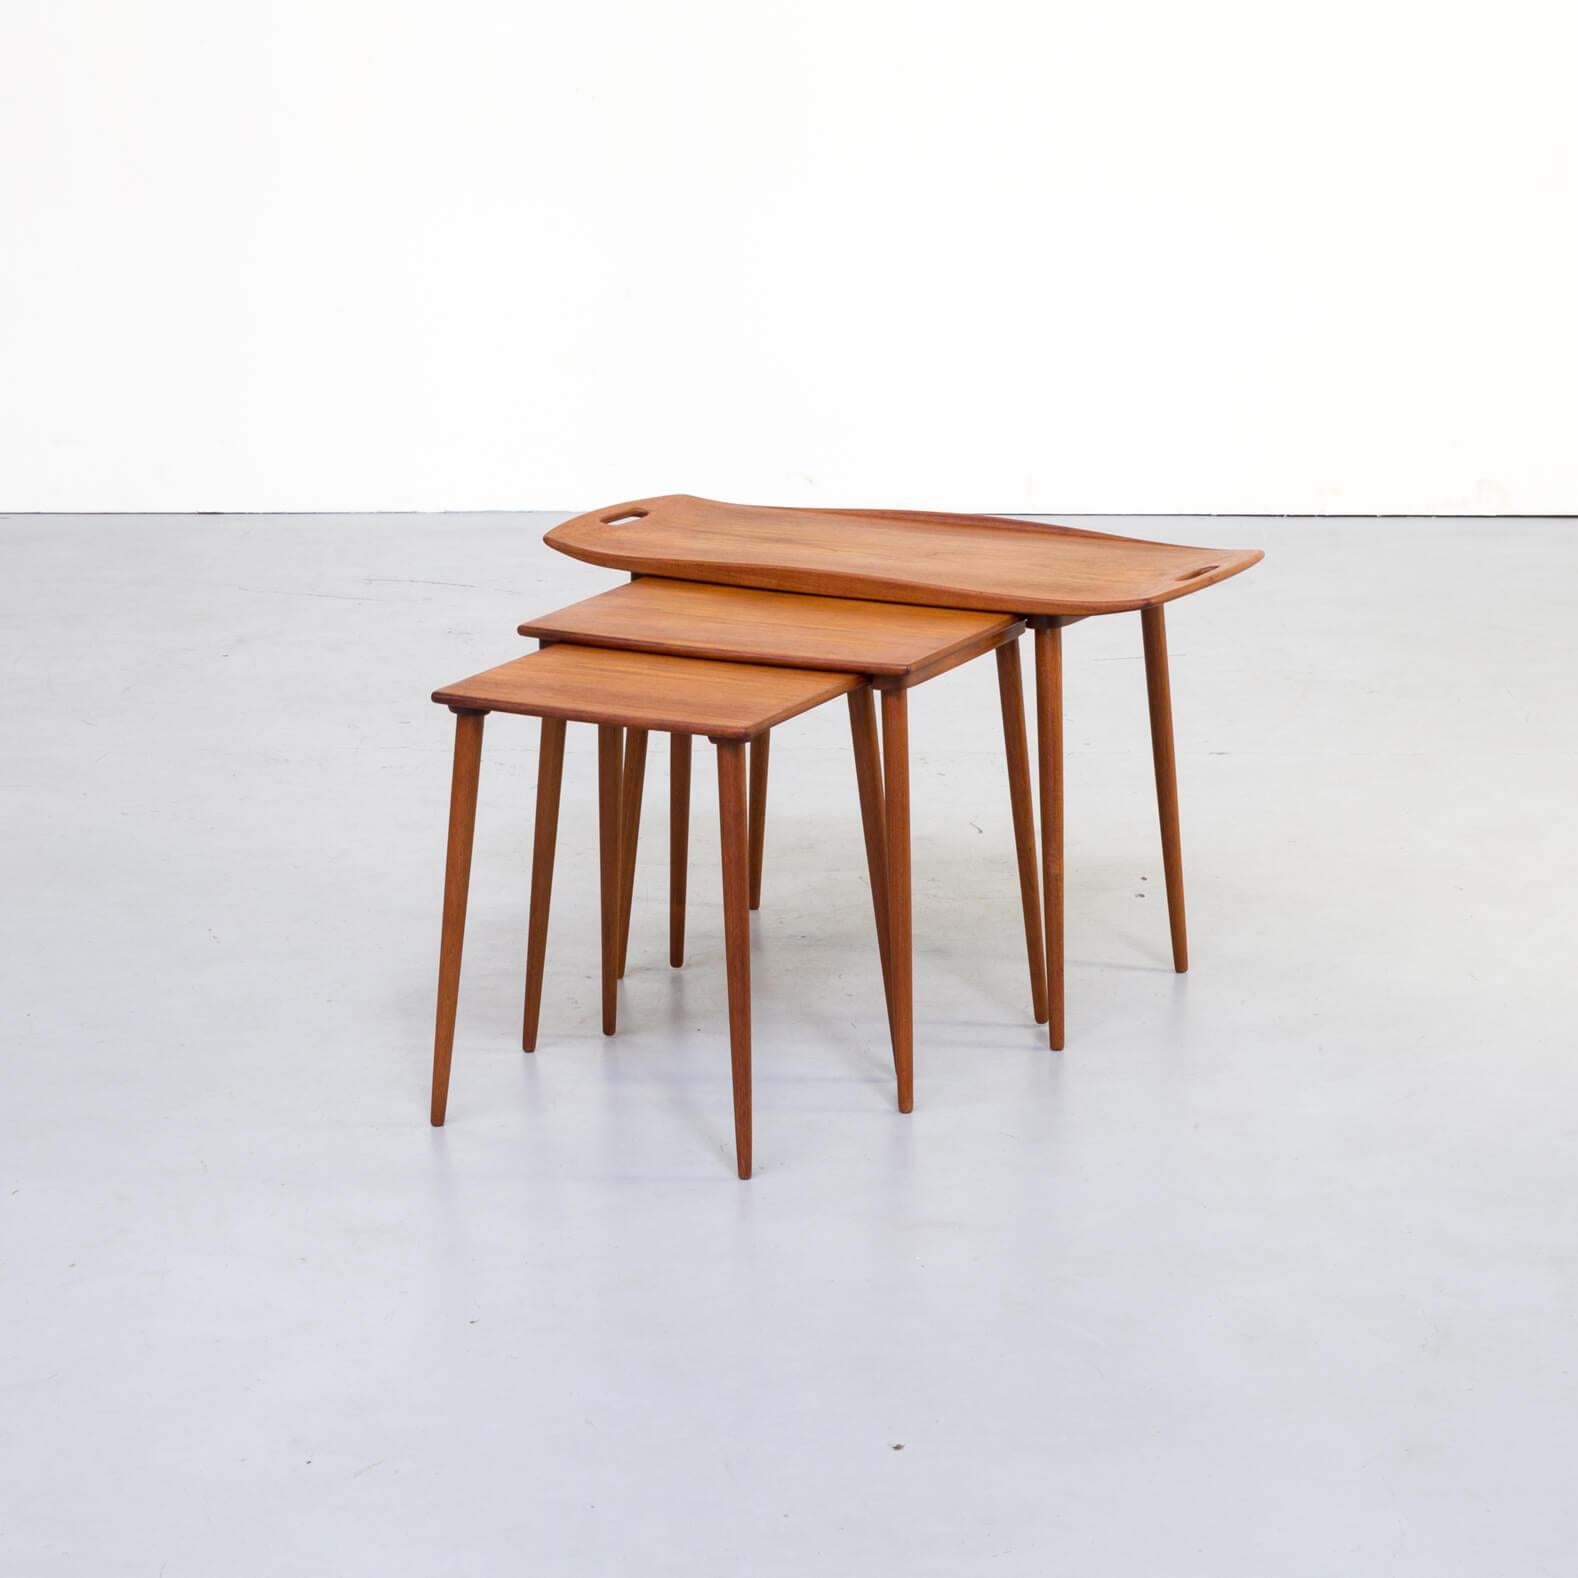 Highly detailed and beautiful teak nesting tables with serving tray handles designed by Jens Quistgaard for Richard Nissen. The sculpted top of the largest table features finger cut-outs at each end, raised edges and slender, tapered legs. A rare